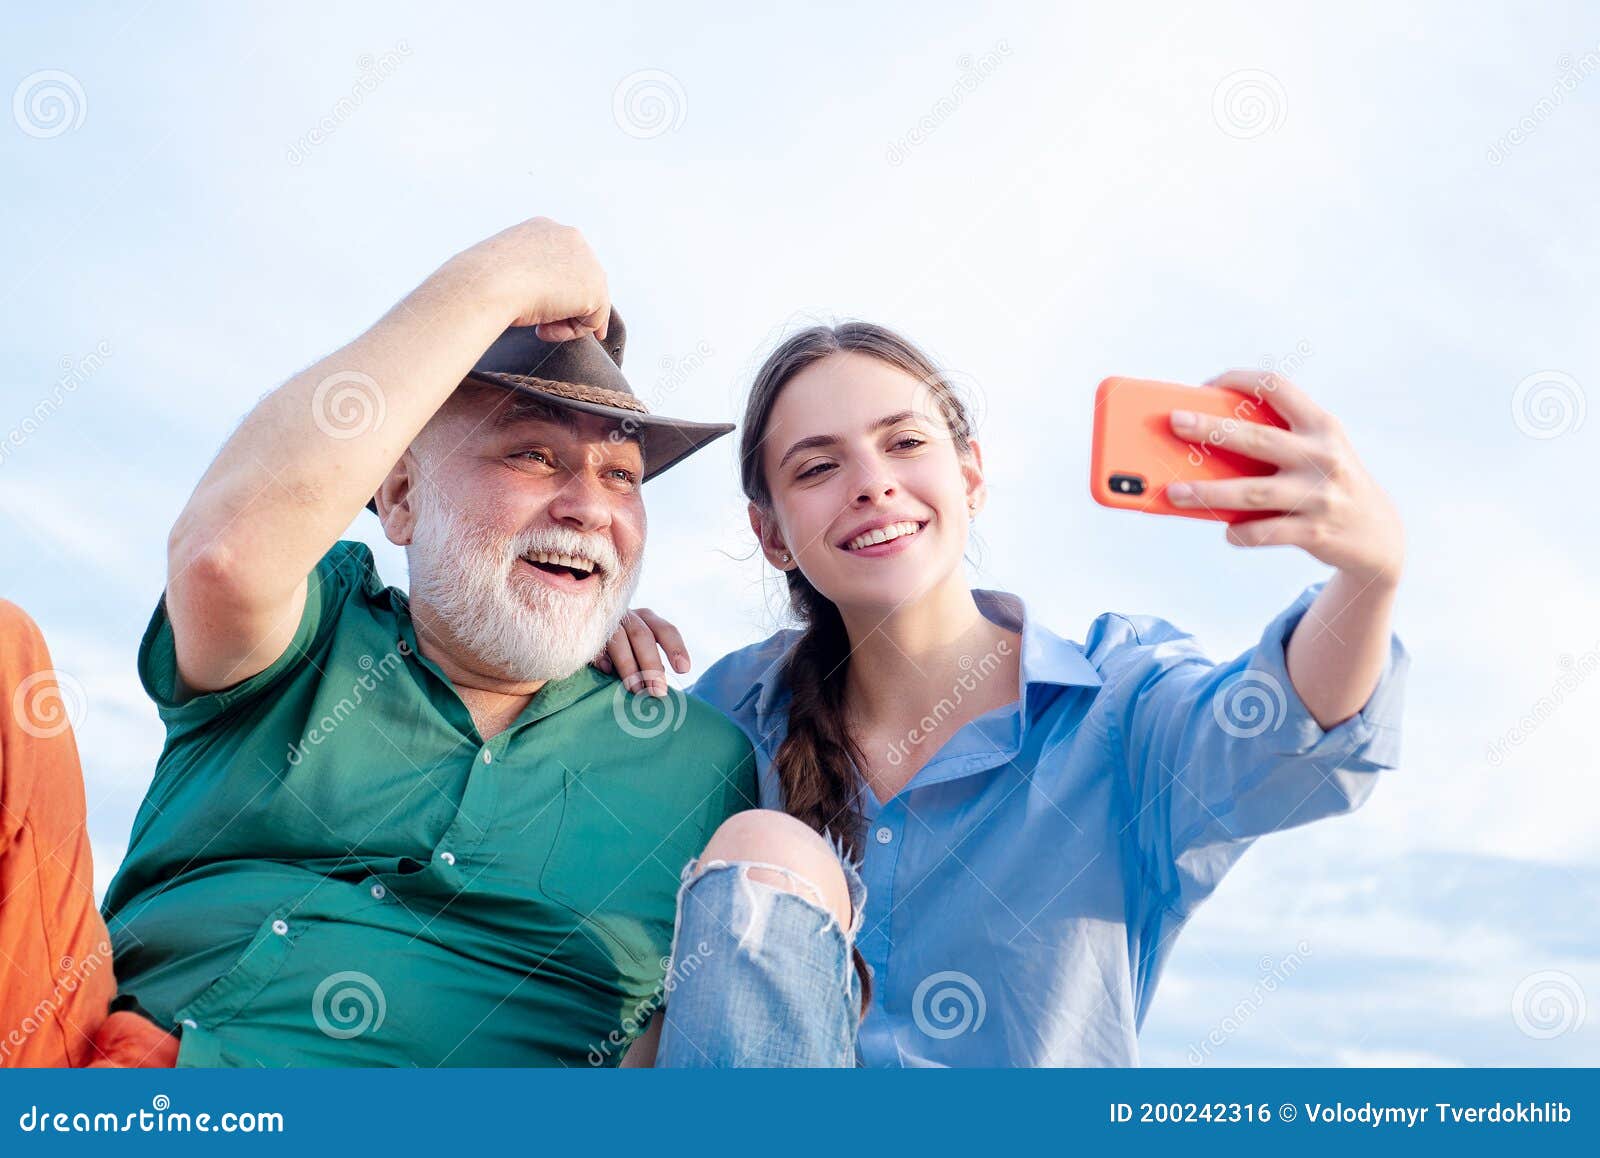 Old Man Licking Young Girl